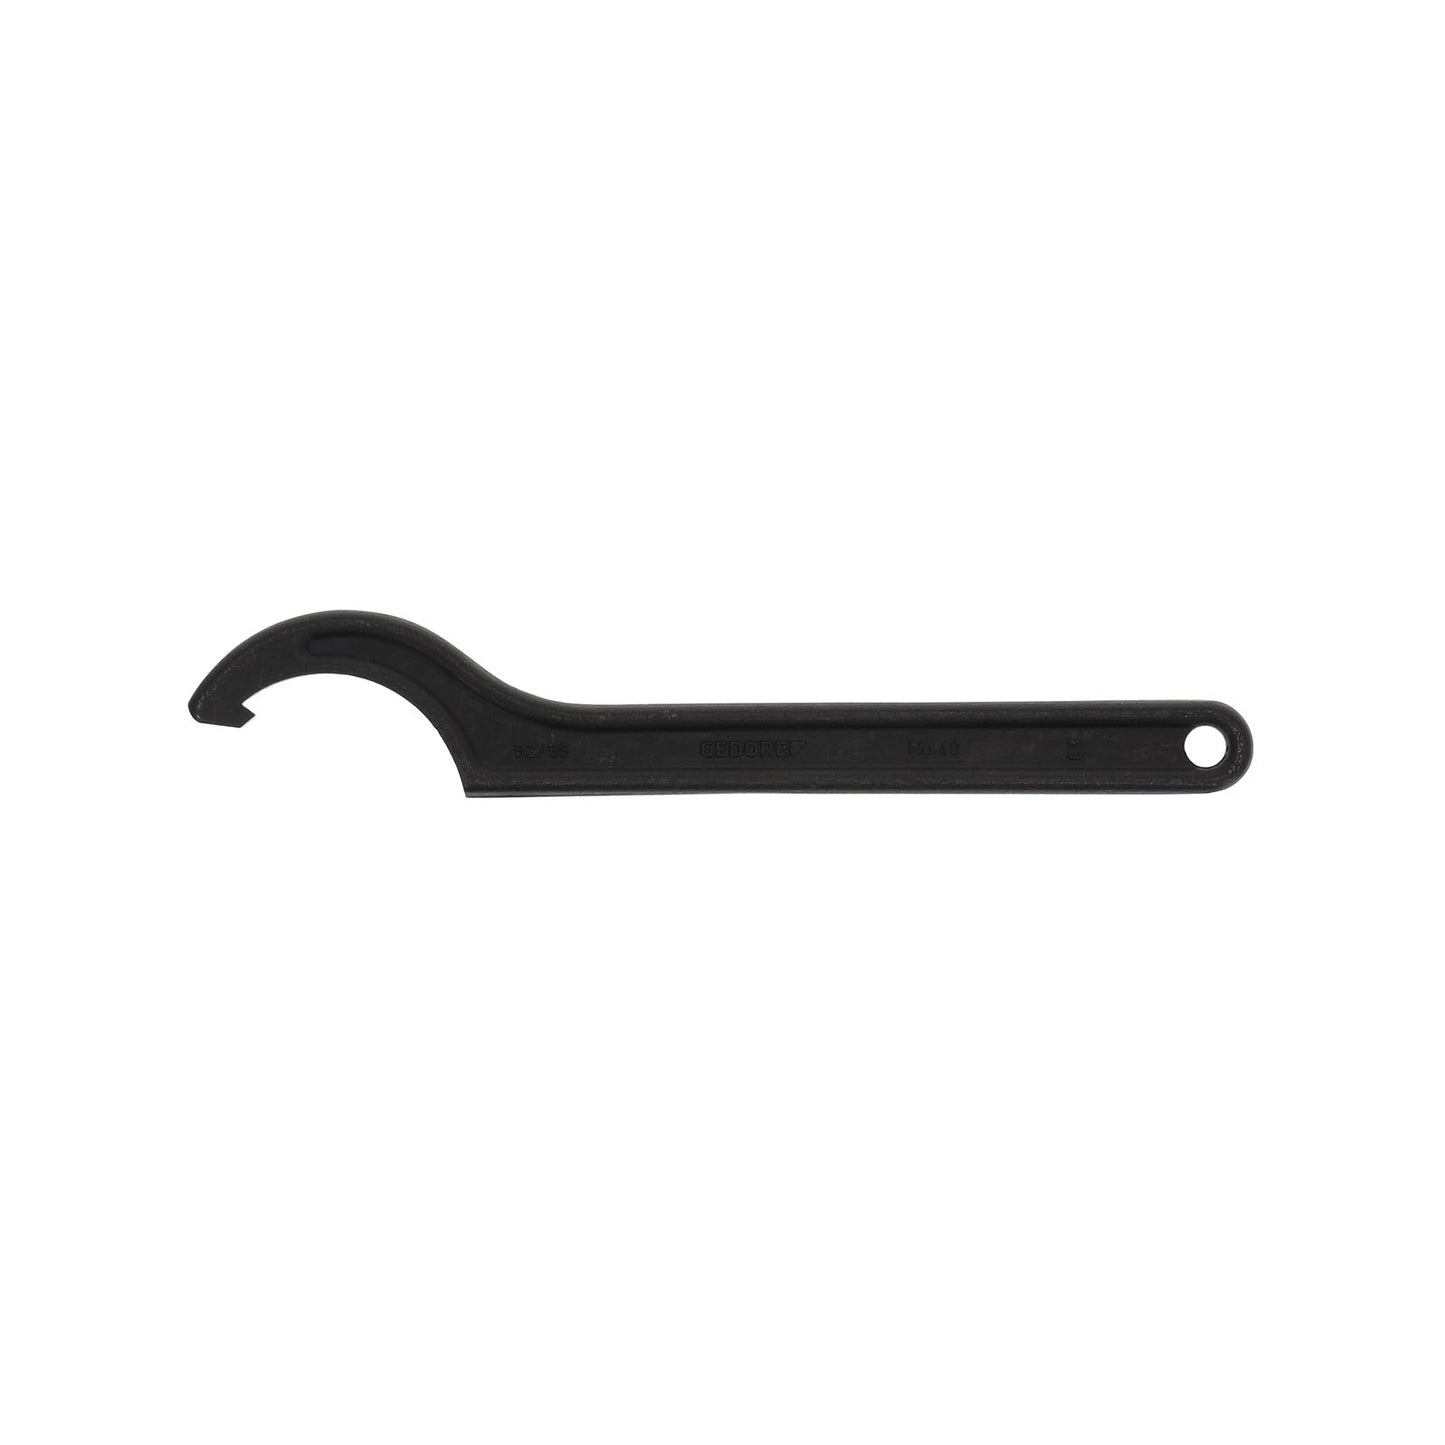 GEDORE 40 52-55 - Hook Wrench, 52-55 (6334530)